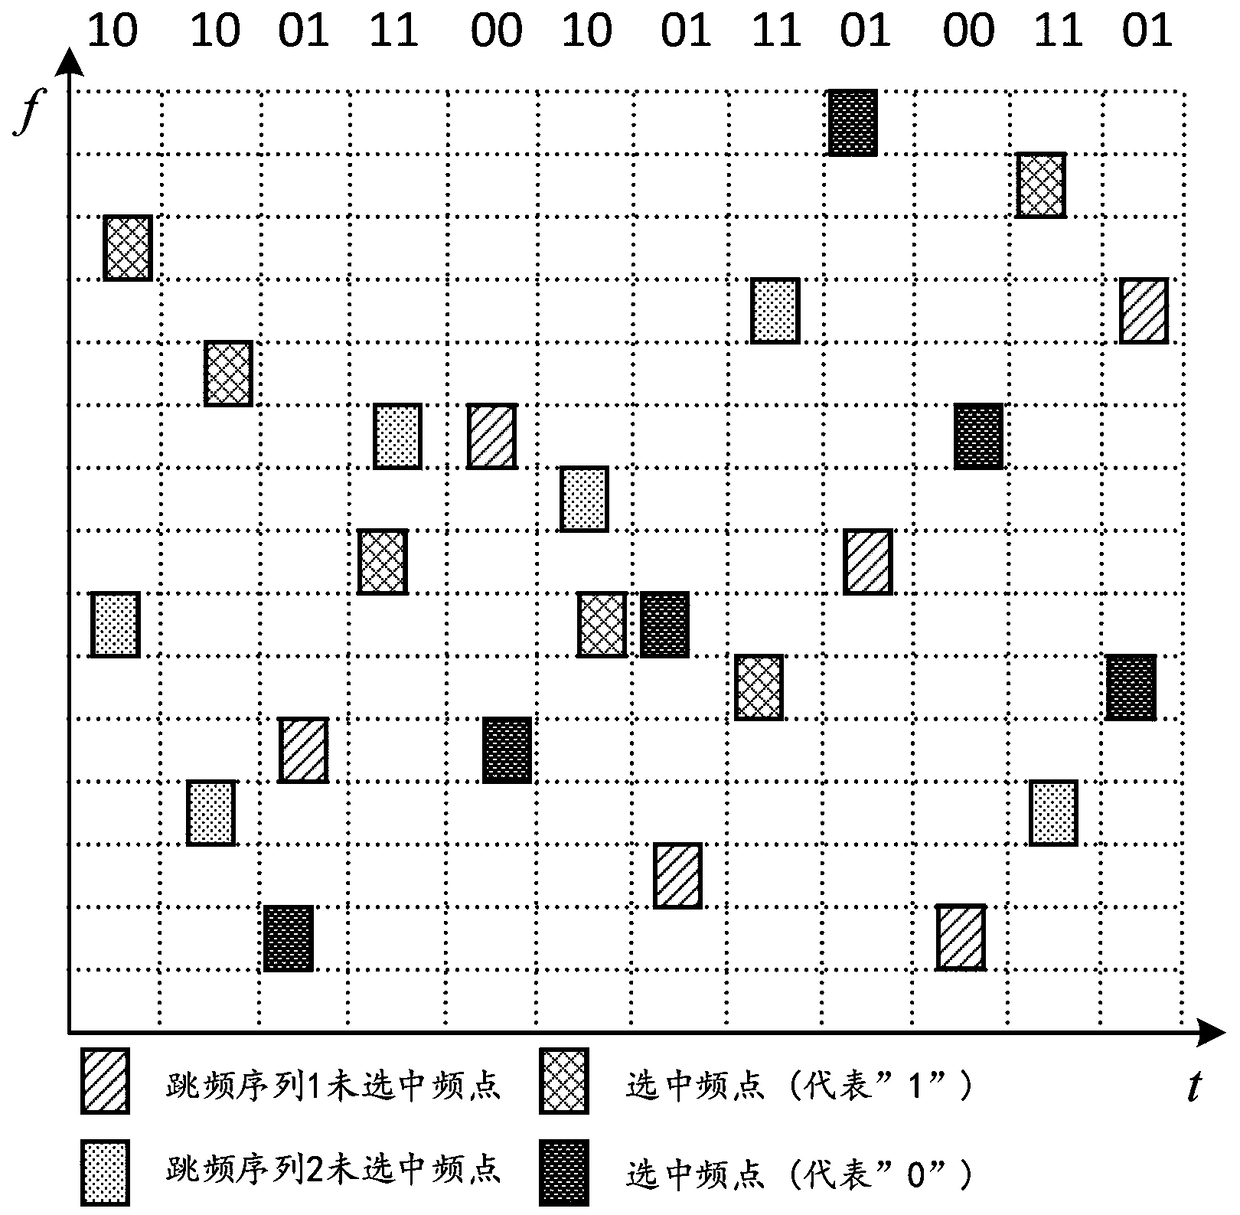 Two-dimensional pattern modulation frequency hopping communication method